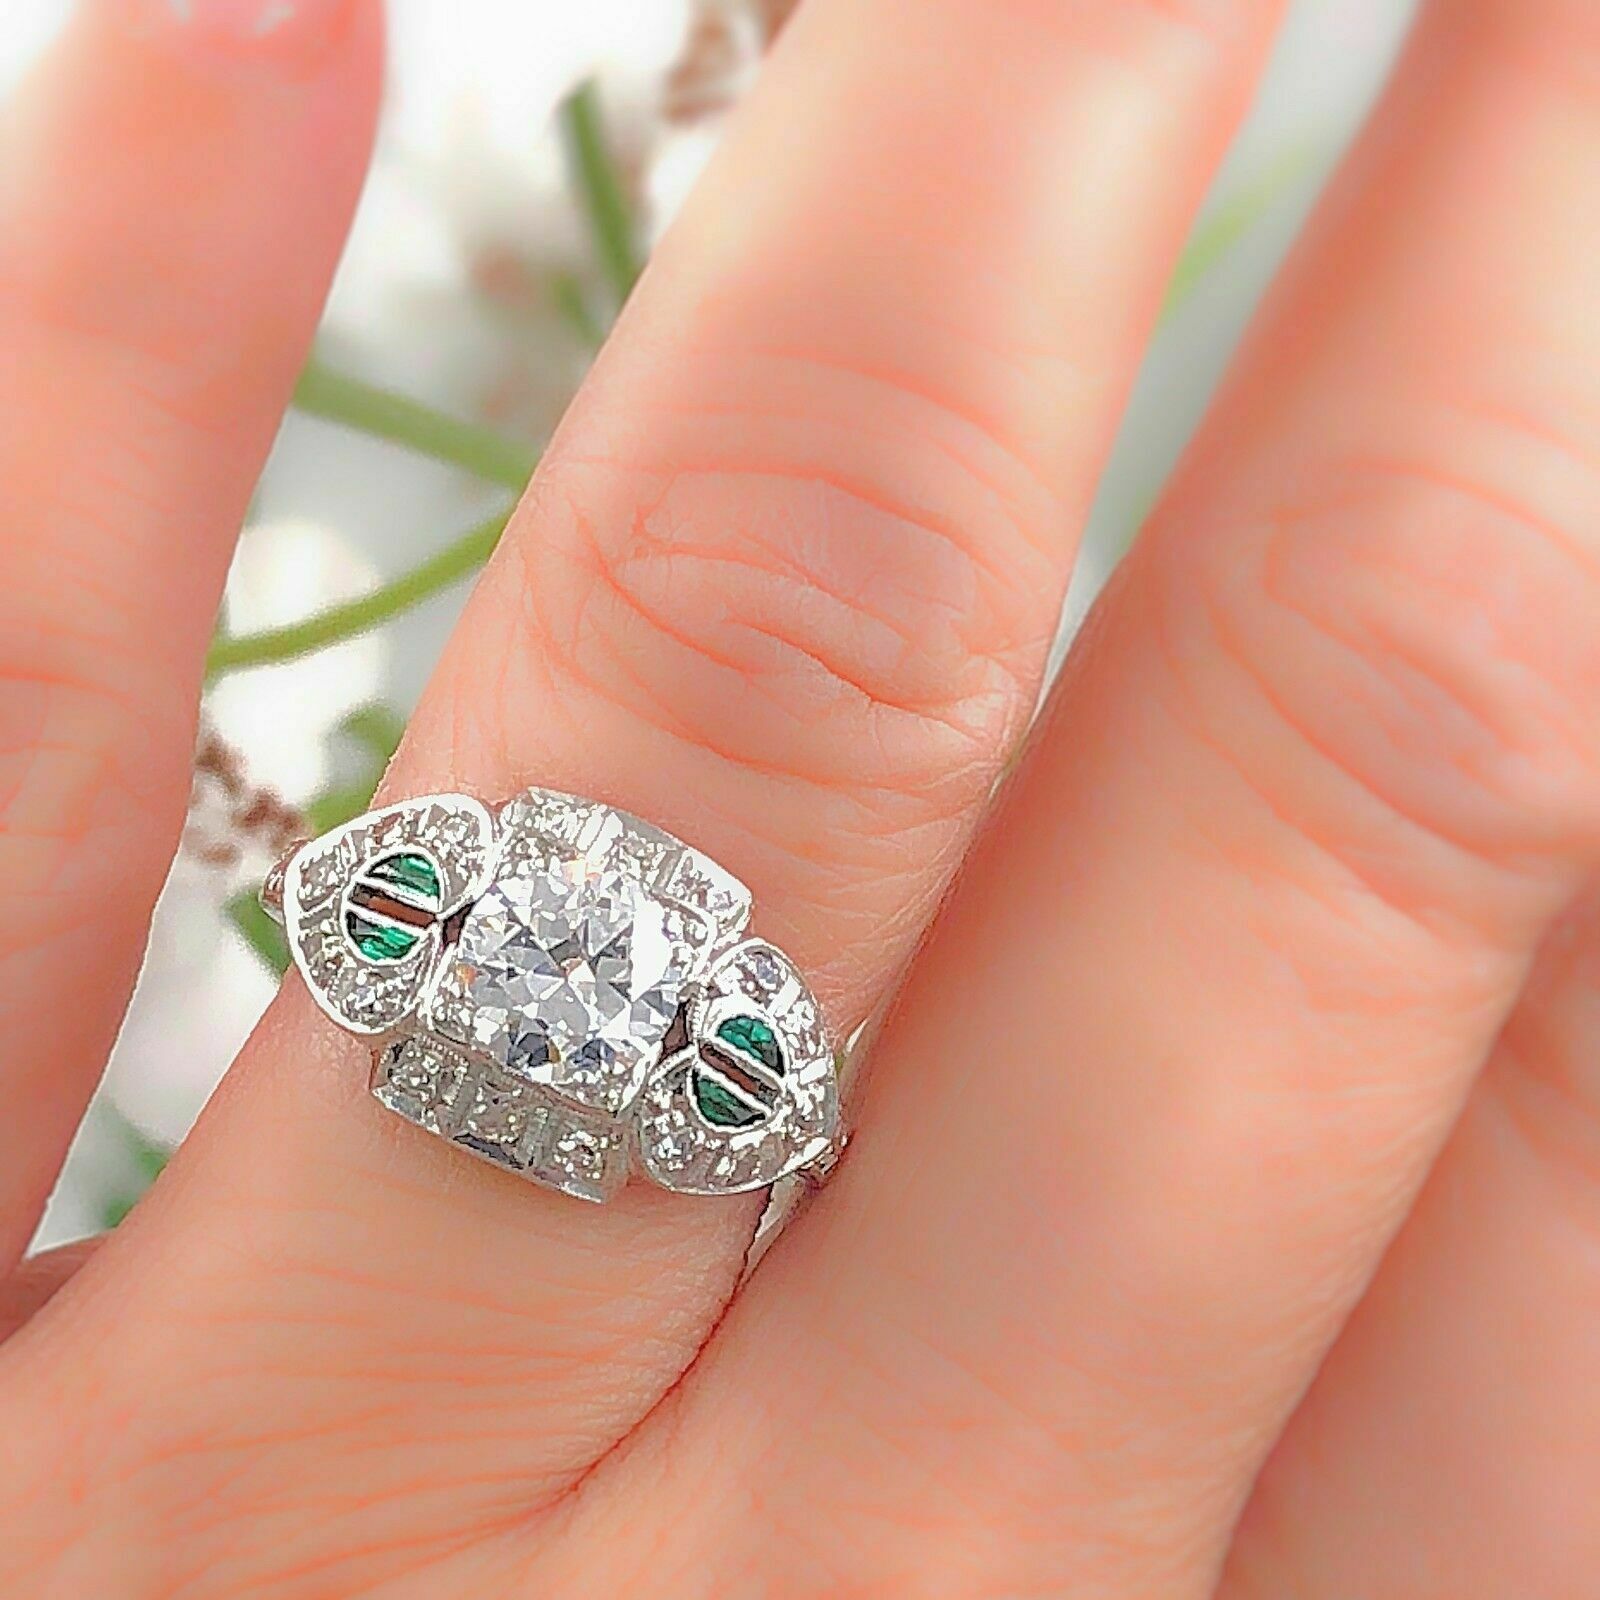 How Much Should An Engagement Ring Cost? 2019 Rules